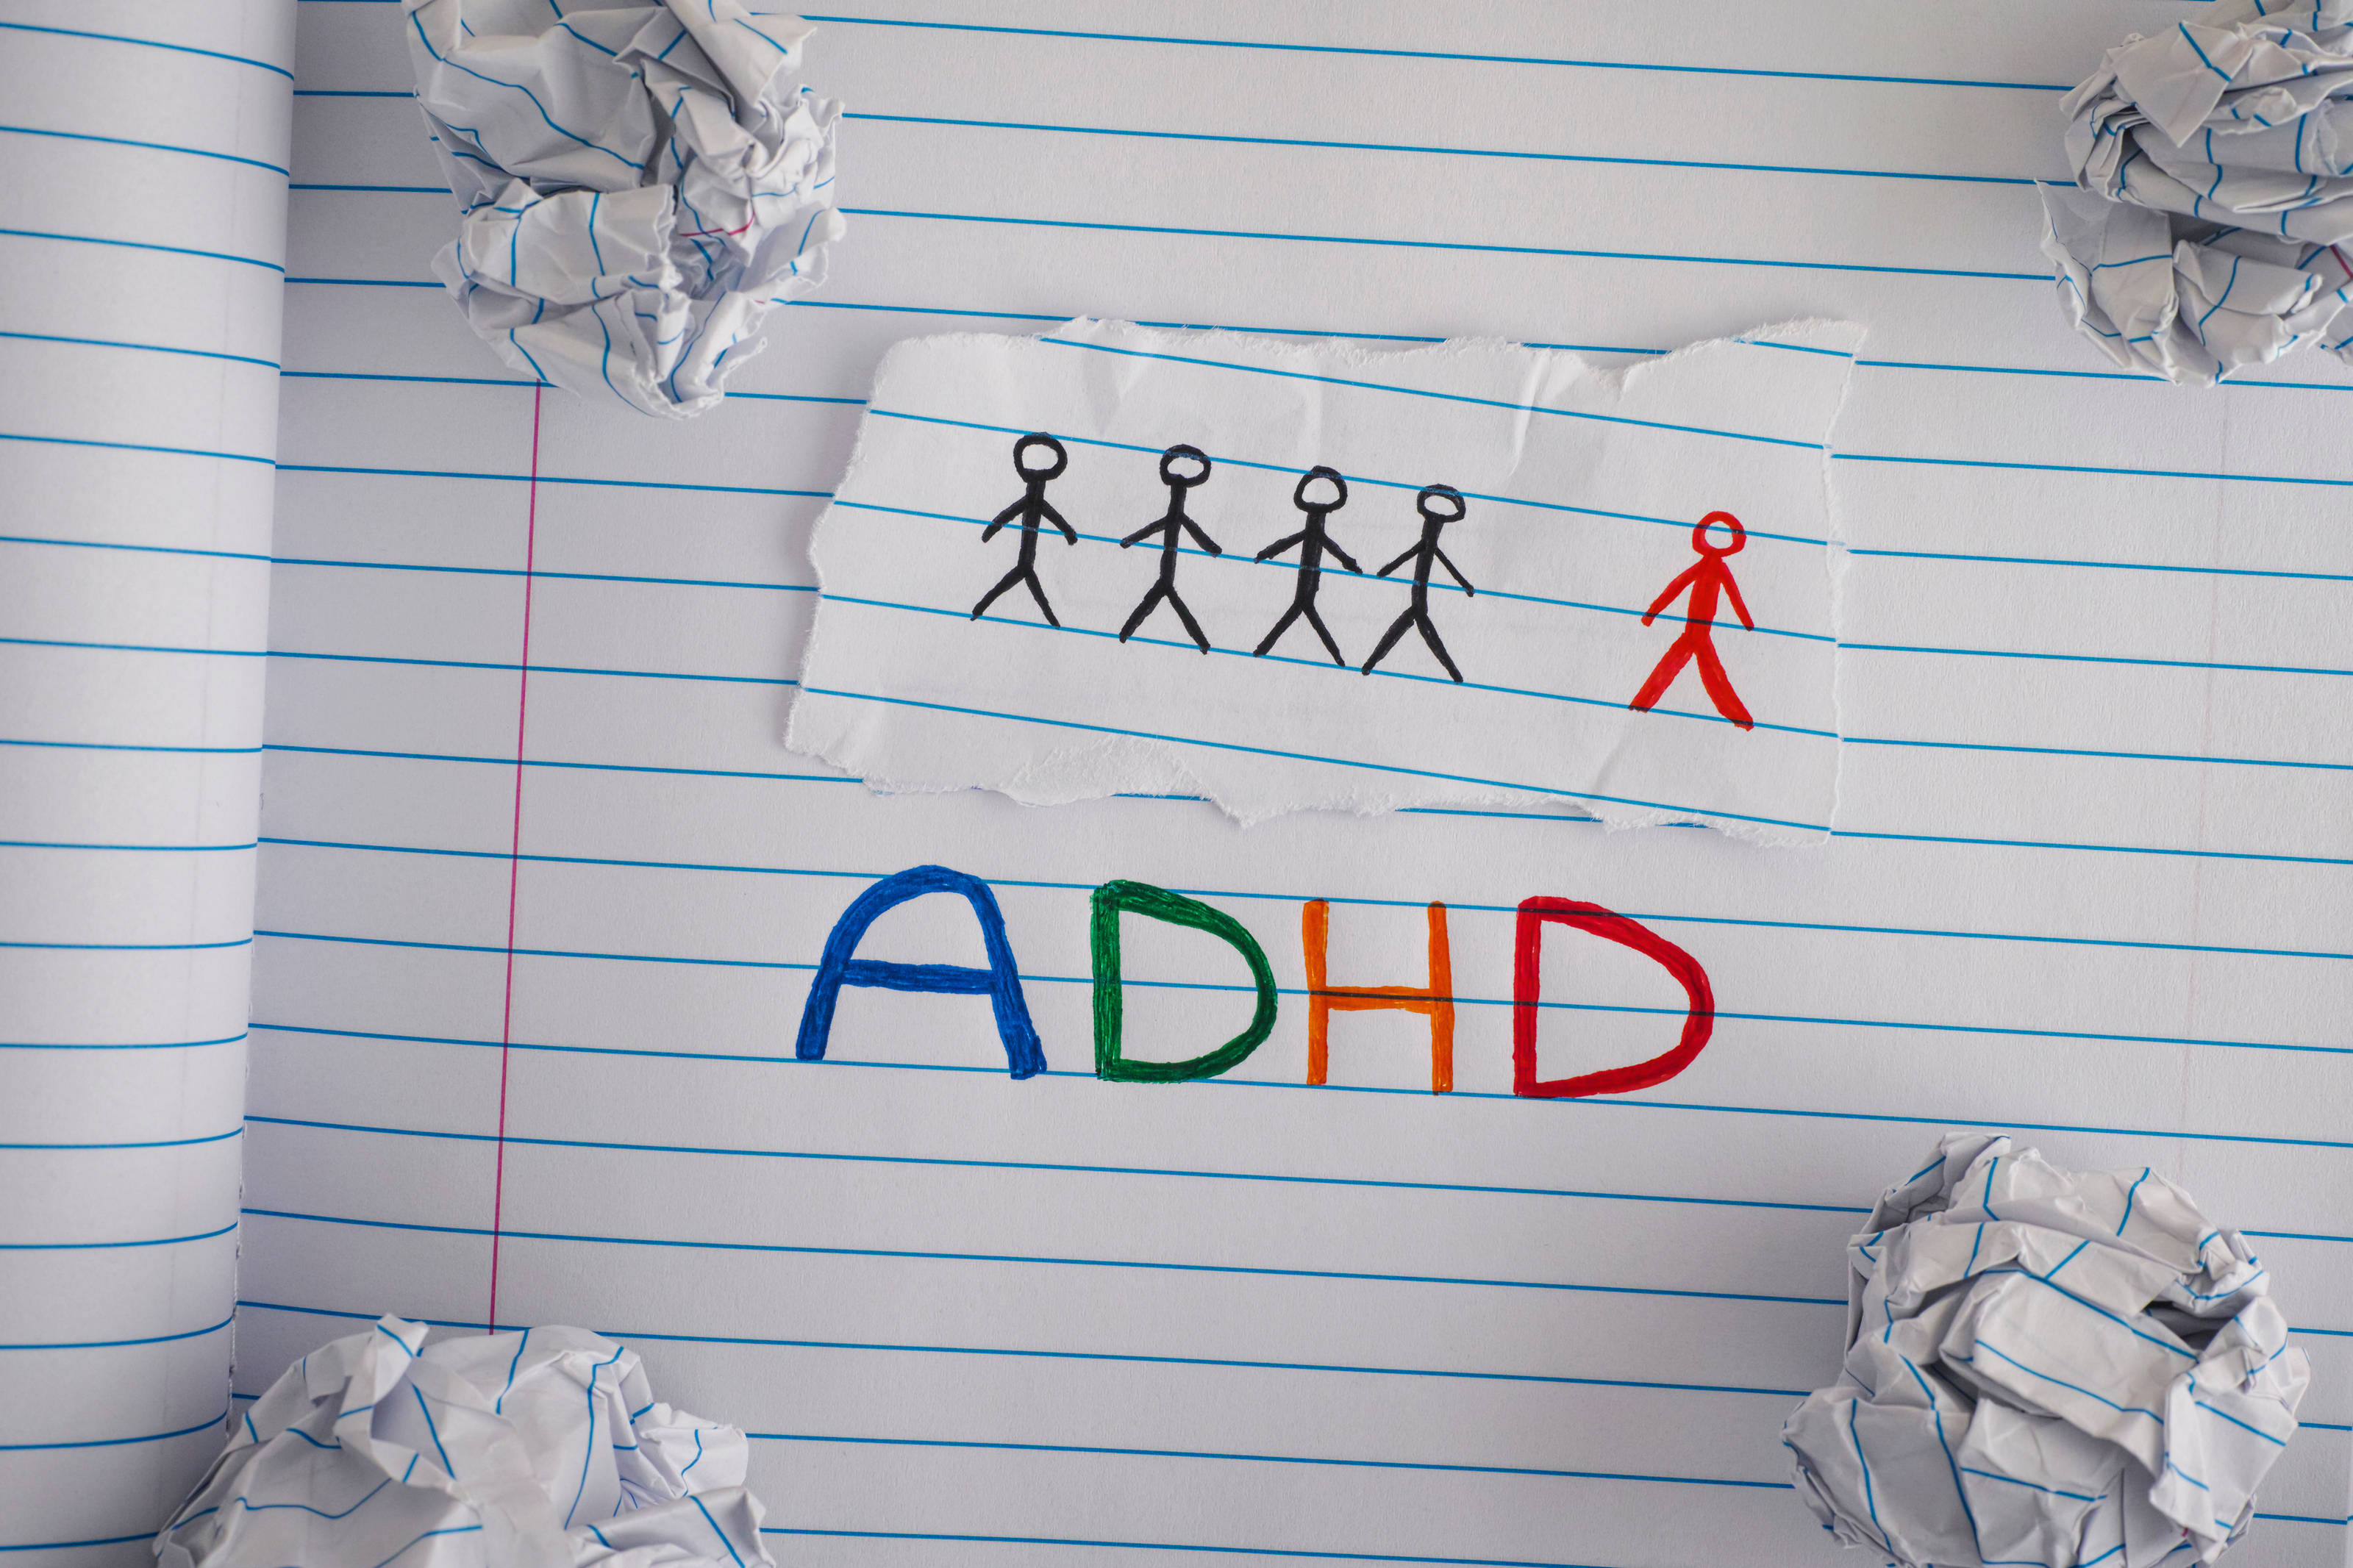 ADHD: Your disability rights at work